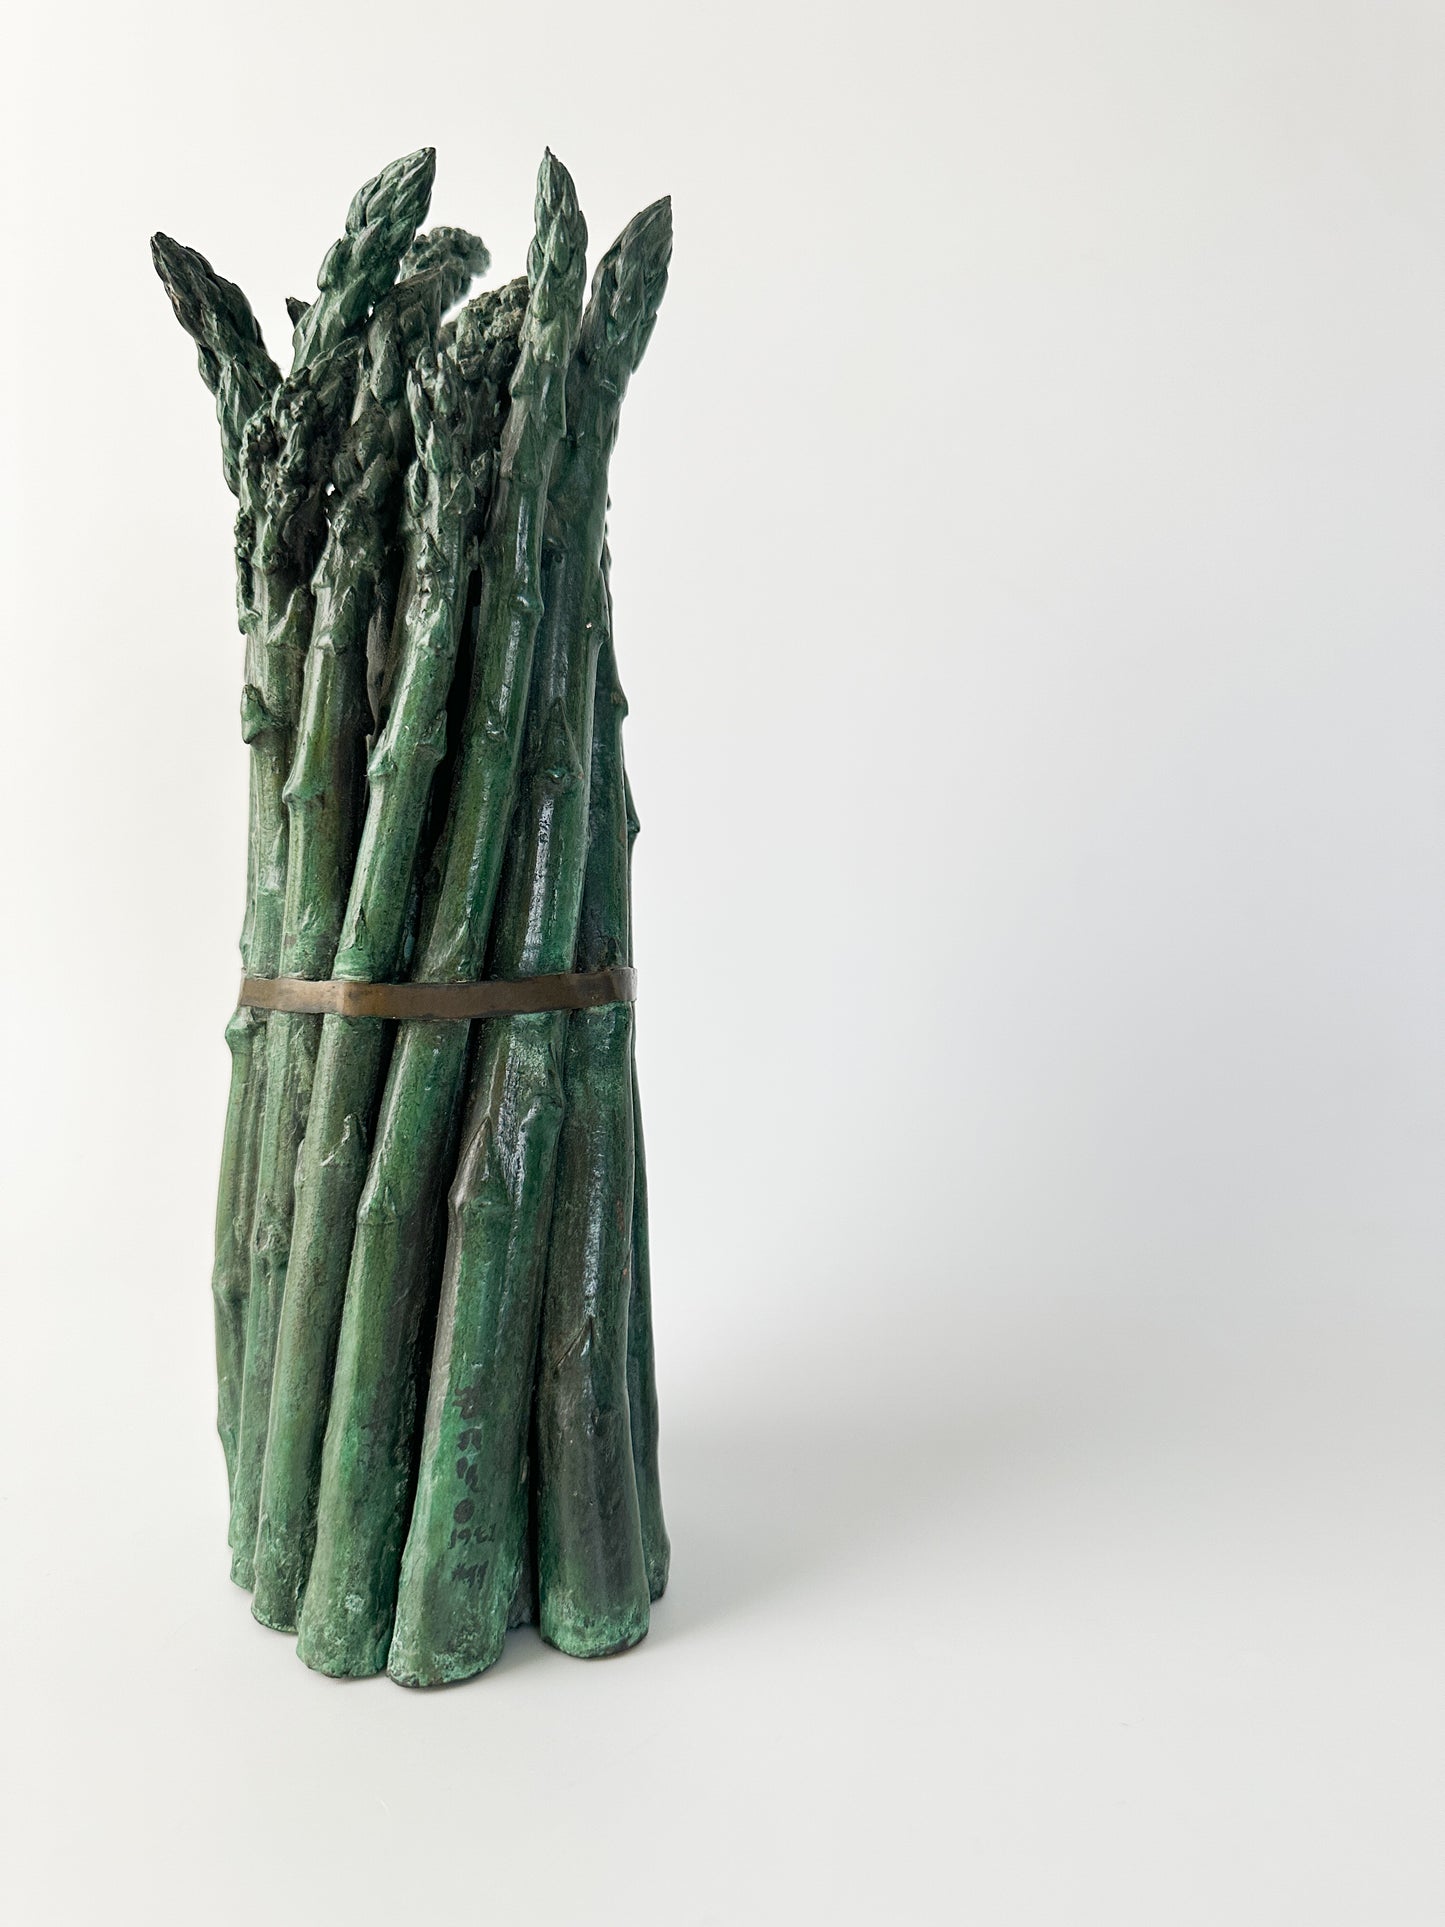 Donald L. Reed Bronze Asparagus Sculpture (signed) Heavy